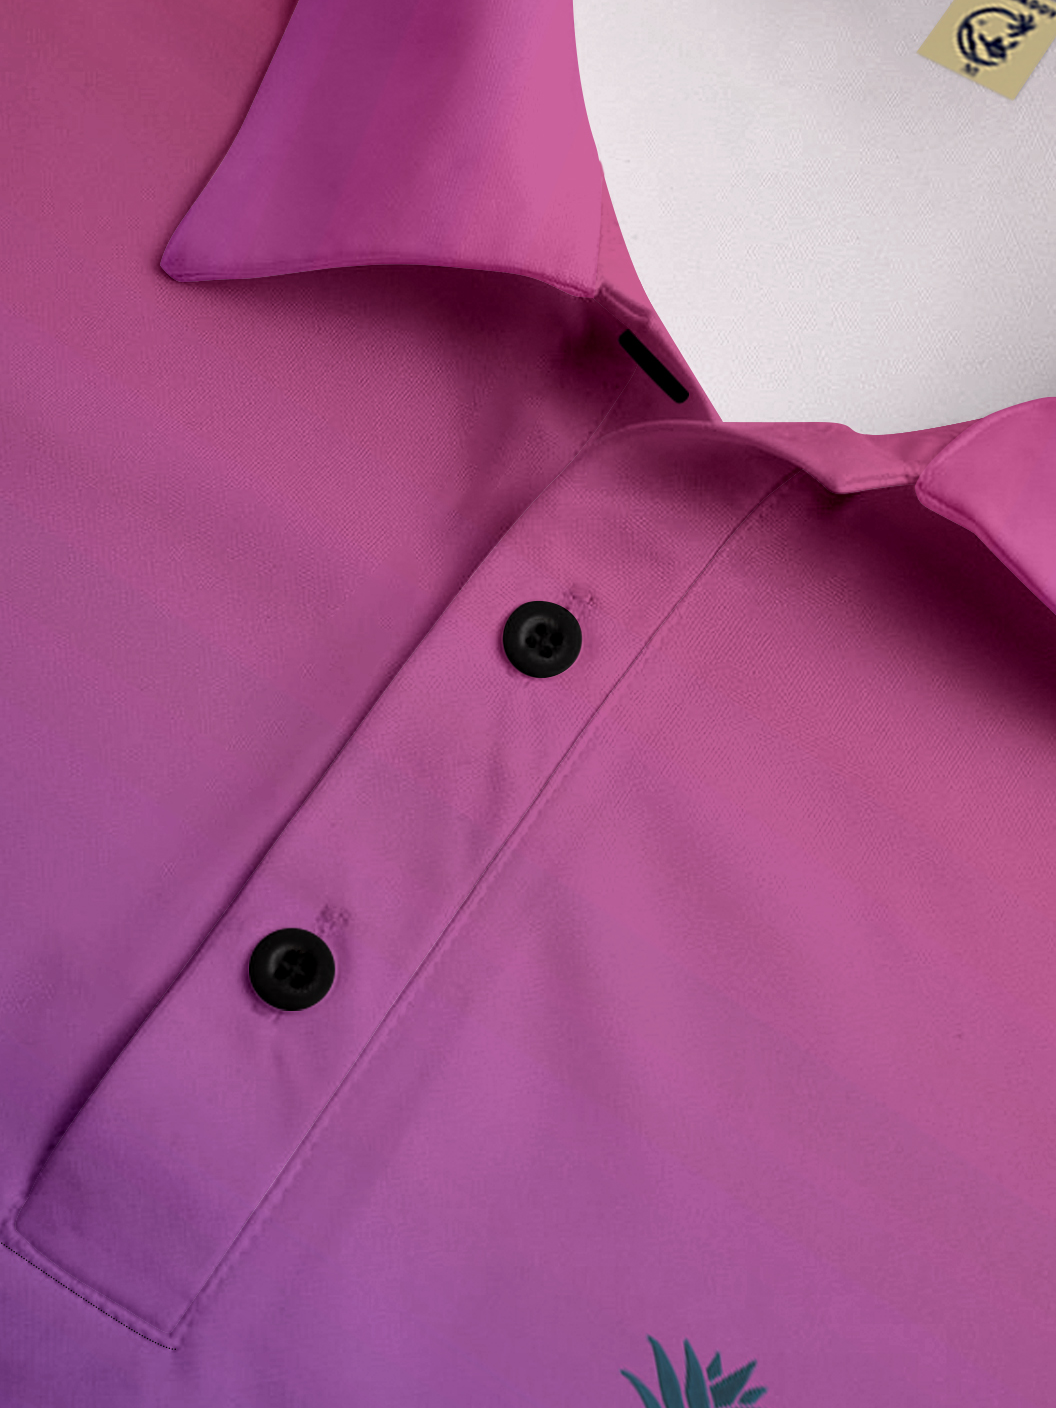 Hardaddy Moisture-wicking Ombre Pineapple Golf Polo Shirt